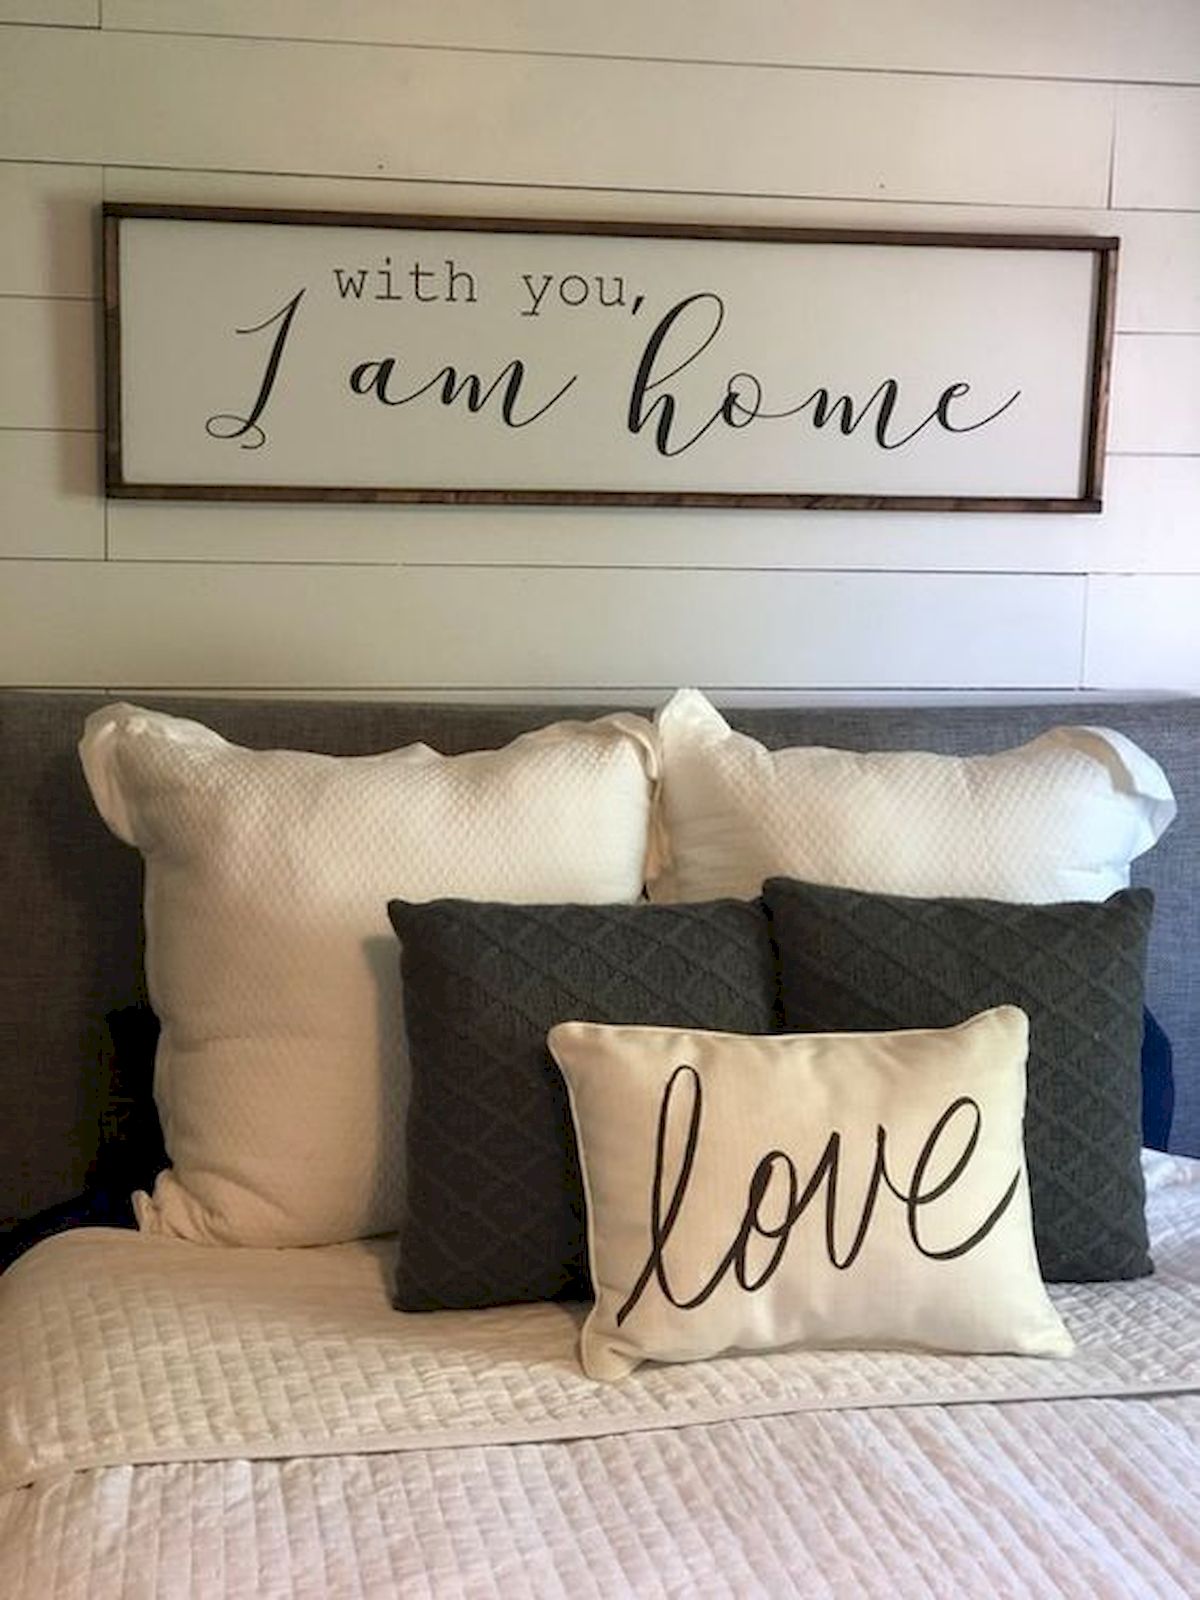 50 Awesome Wall Decor Ideas For Bedroom (3)